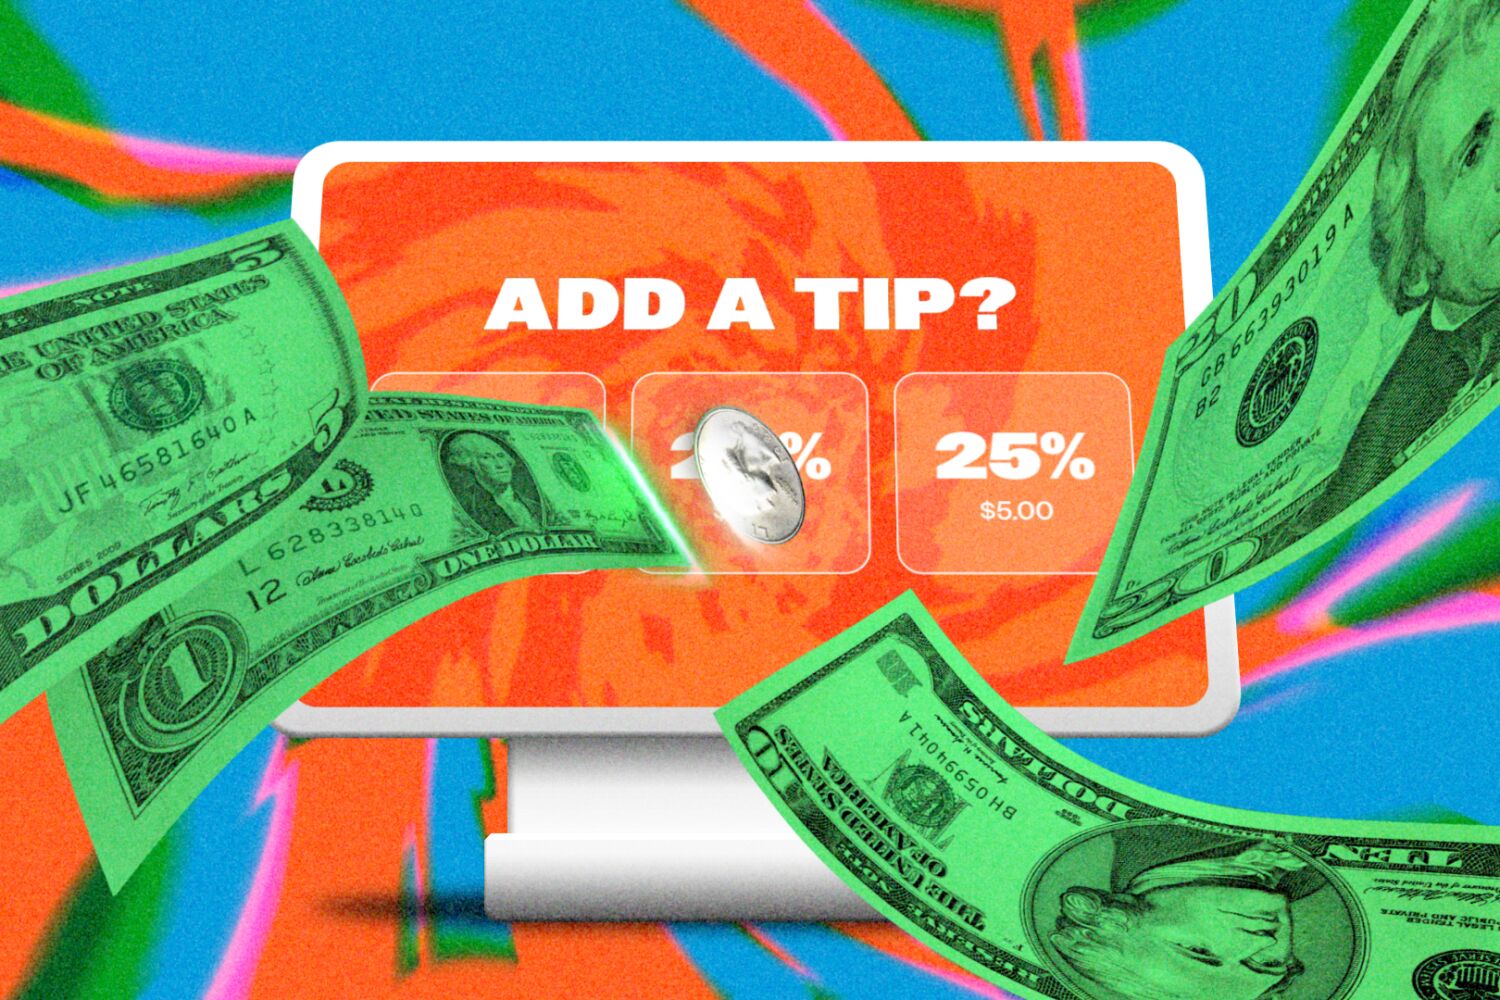 'Do y'all think tipping culture has gotten out of control?' Inside our evolving tipping dilemma